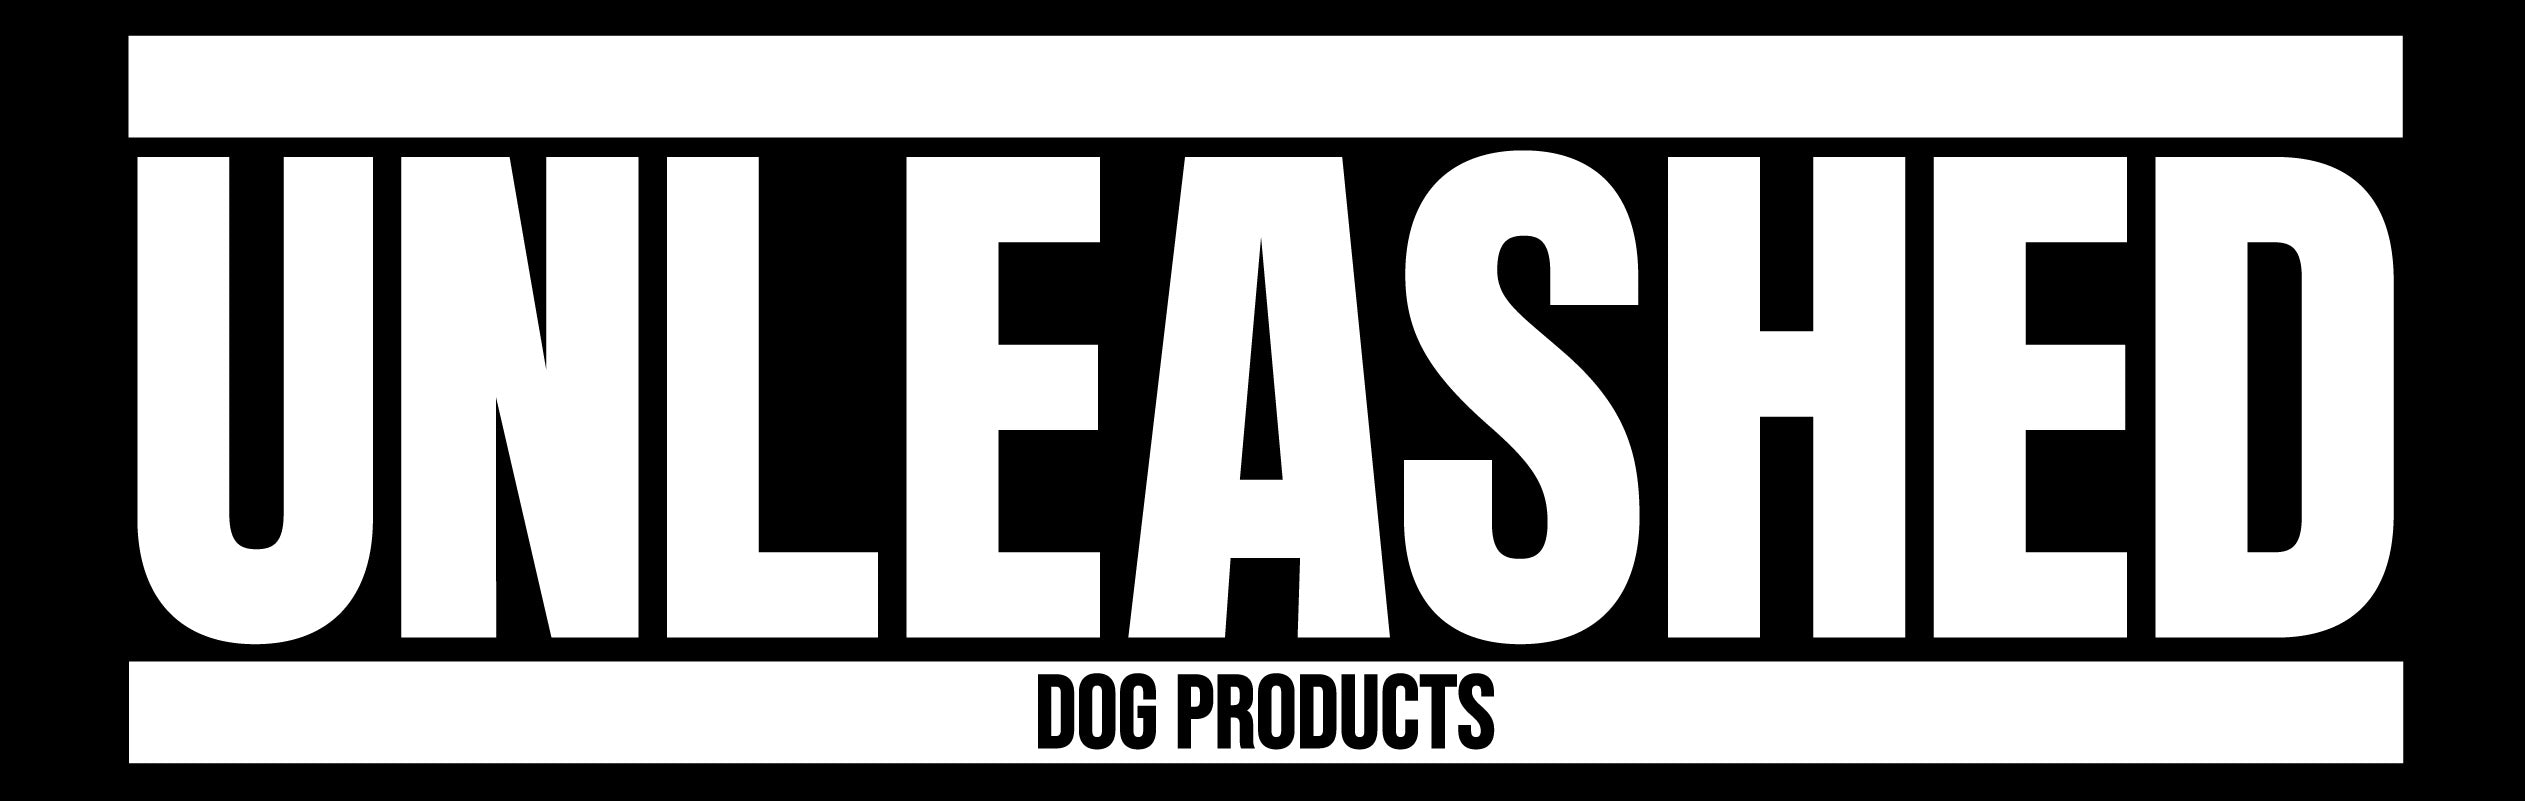 Unleashed Dog Products